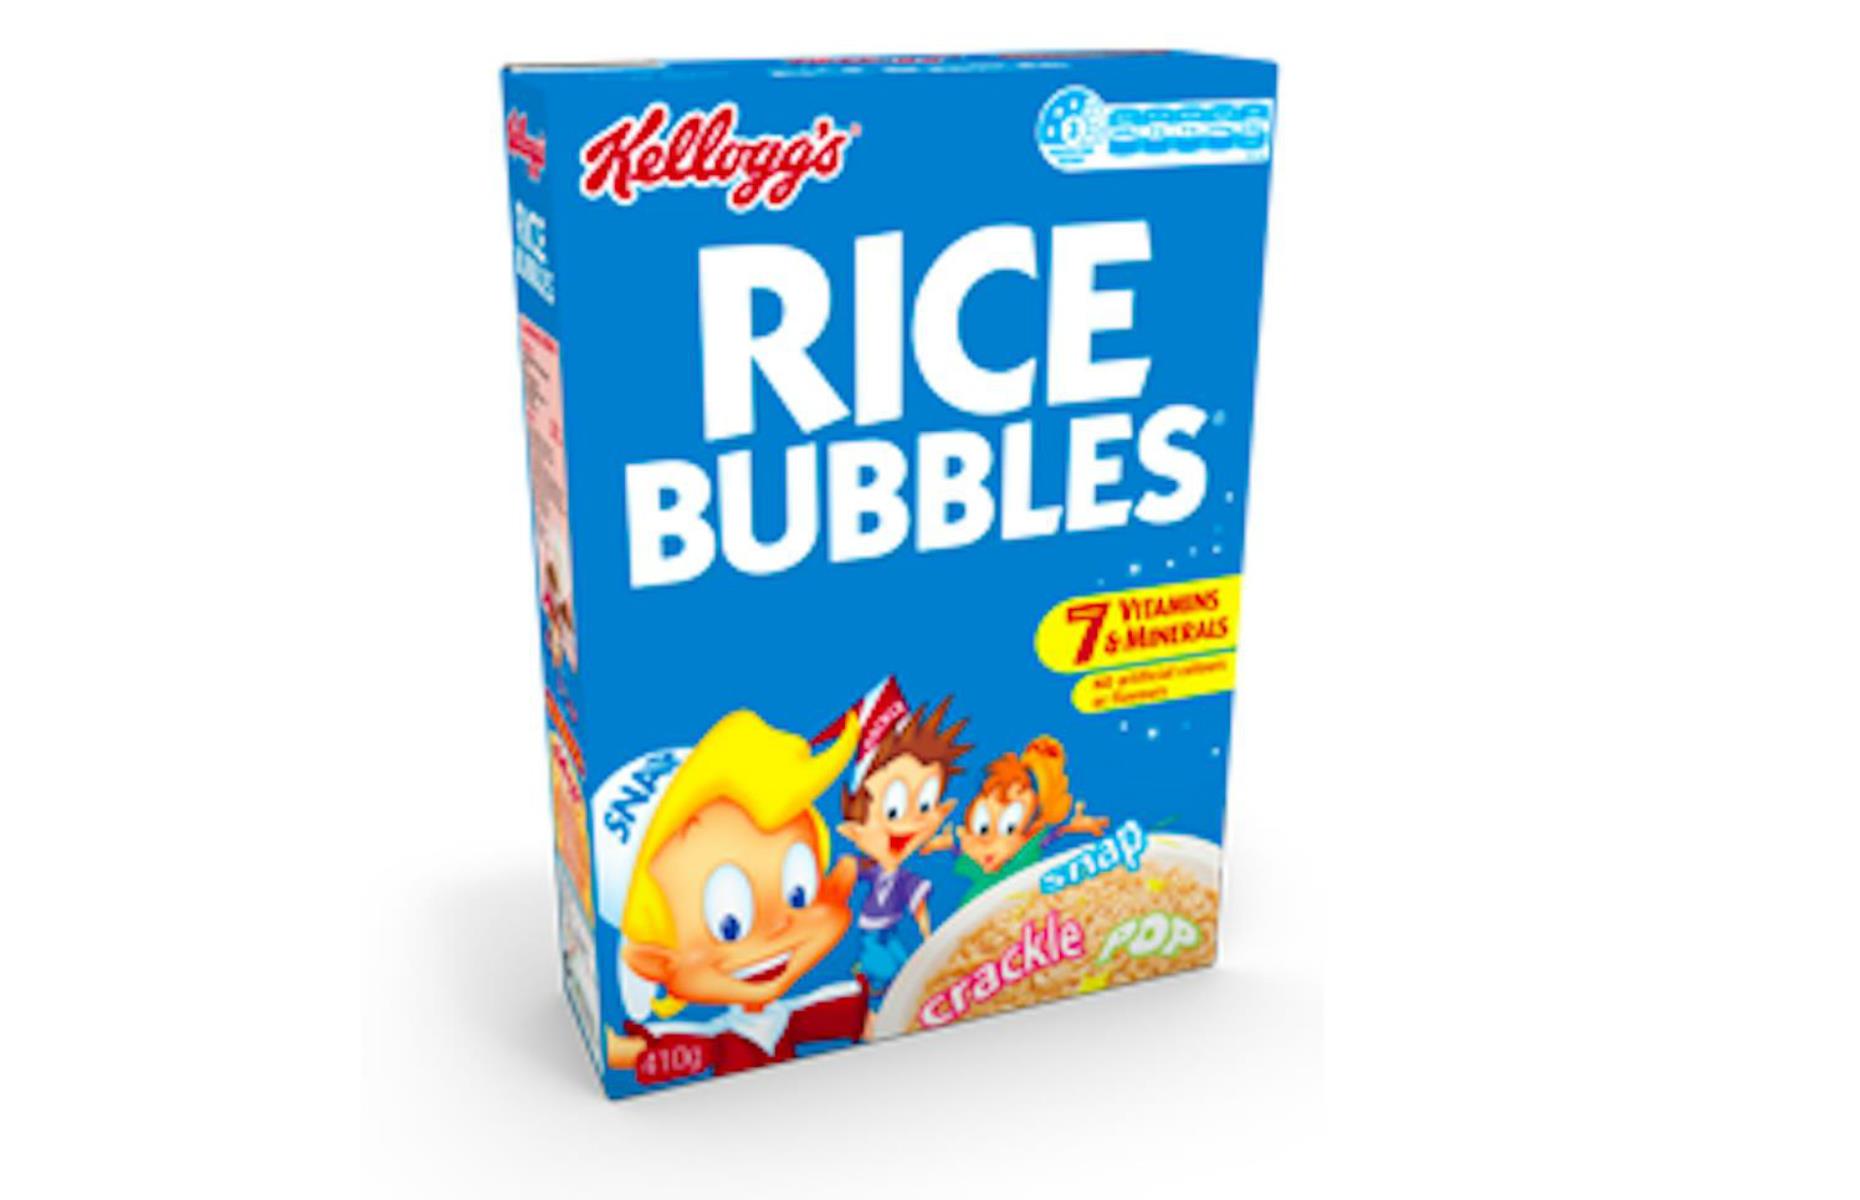 Look out for Rice Bubbles on Australian supermarket shelves